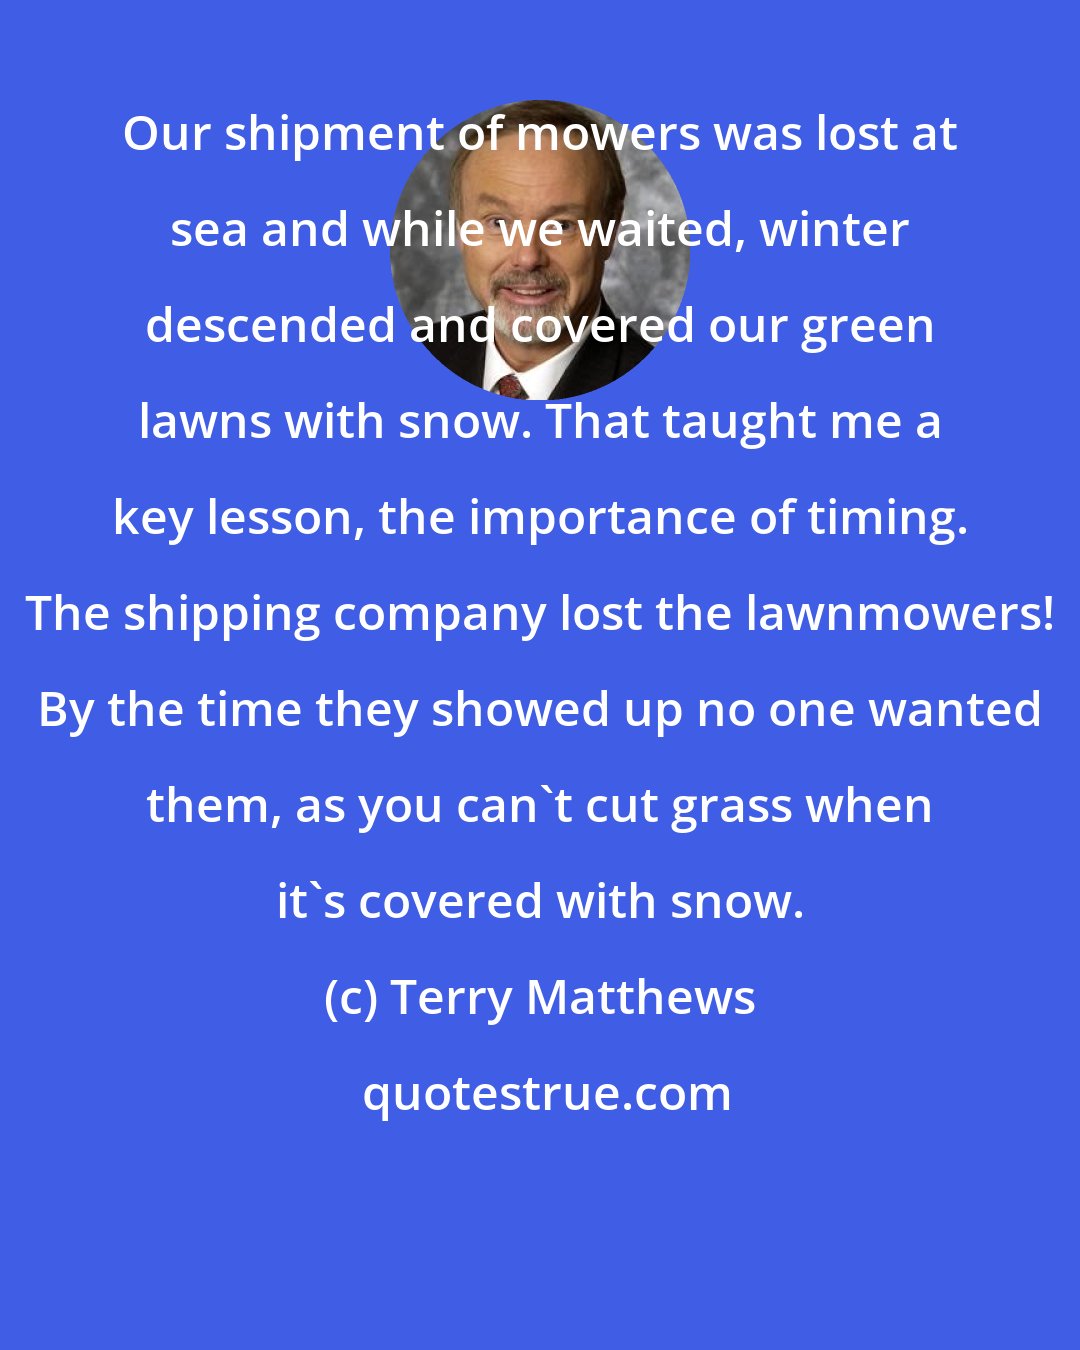 Terry Matthews: Our shipment of mowers was lost at sea and while we waited, winter descended and covered our green lawns with snow. That taught me a key lesson, the importance of timing. The shipping company lost the lawnmowers! By the time they showed up no one wanted them, as you can't cut grass when it's covered with snow.